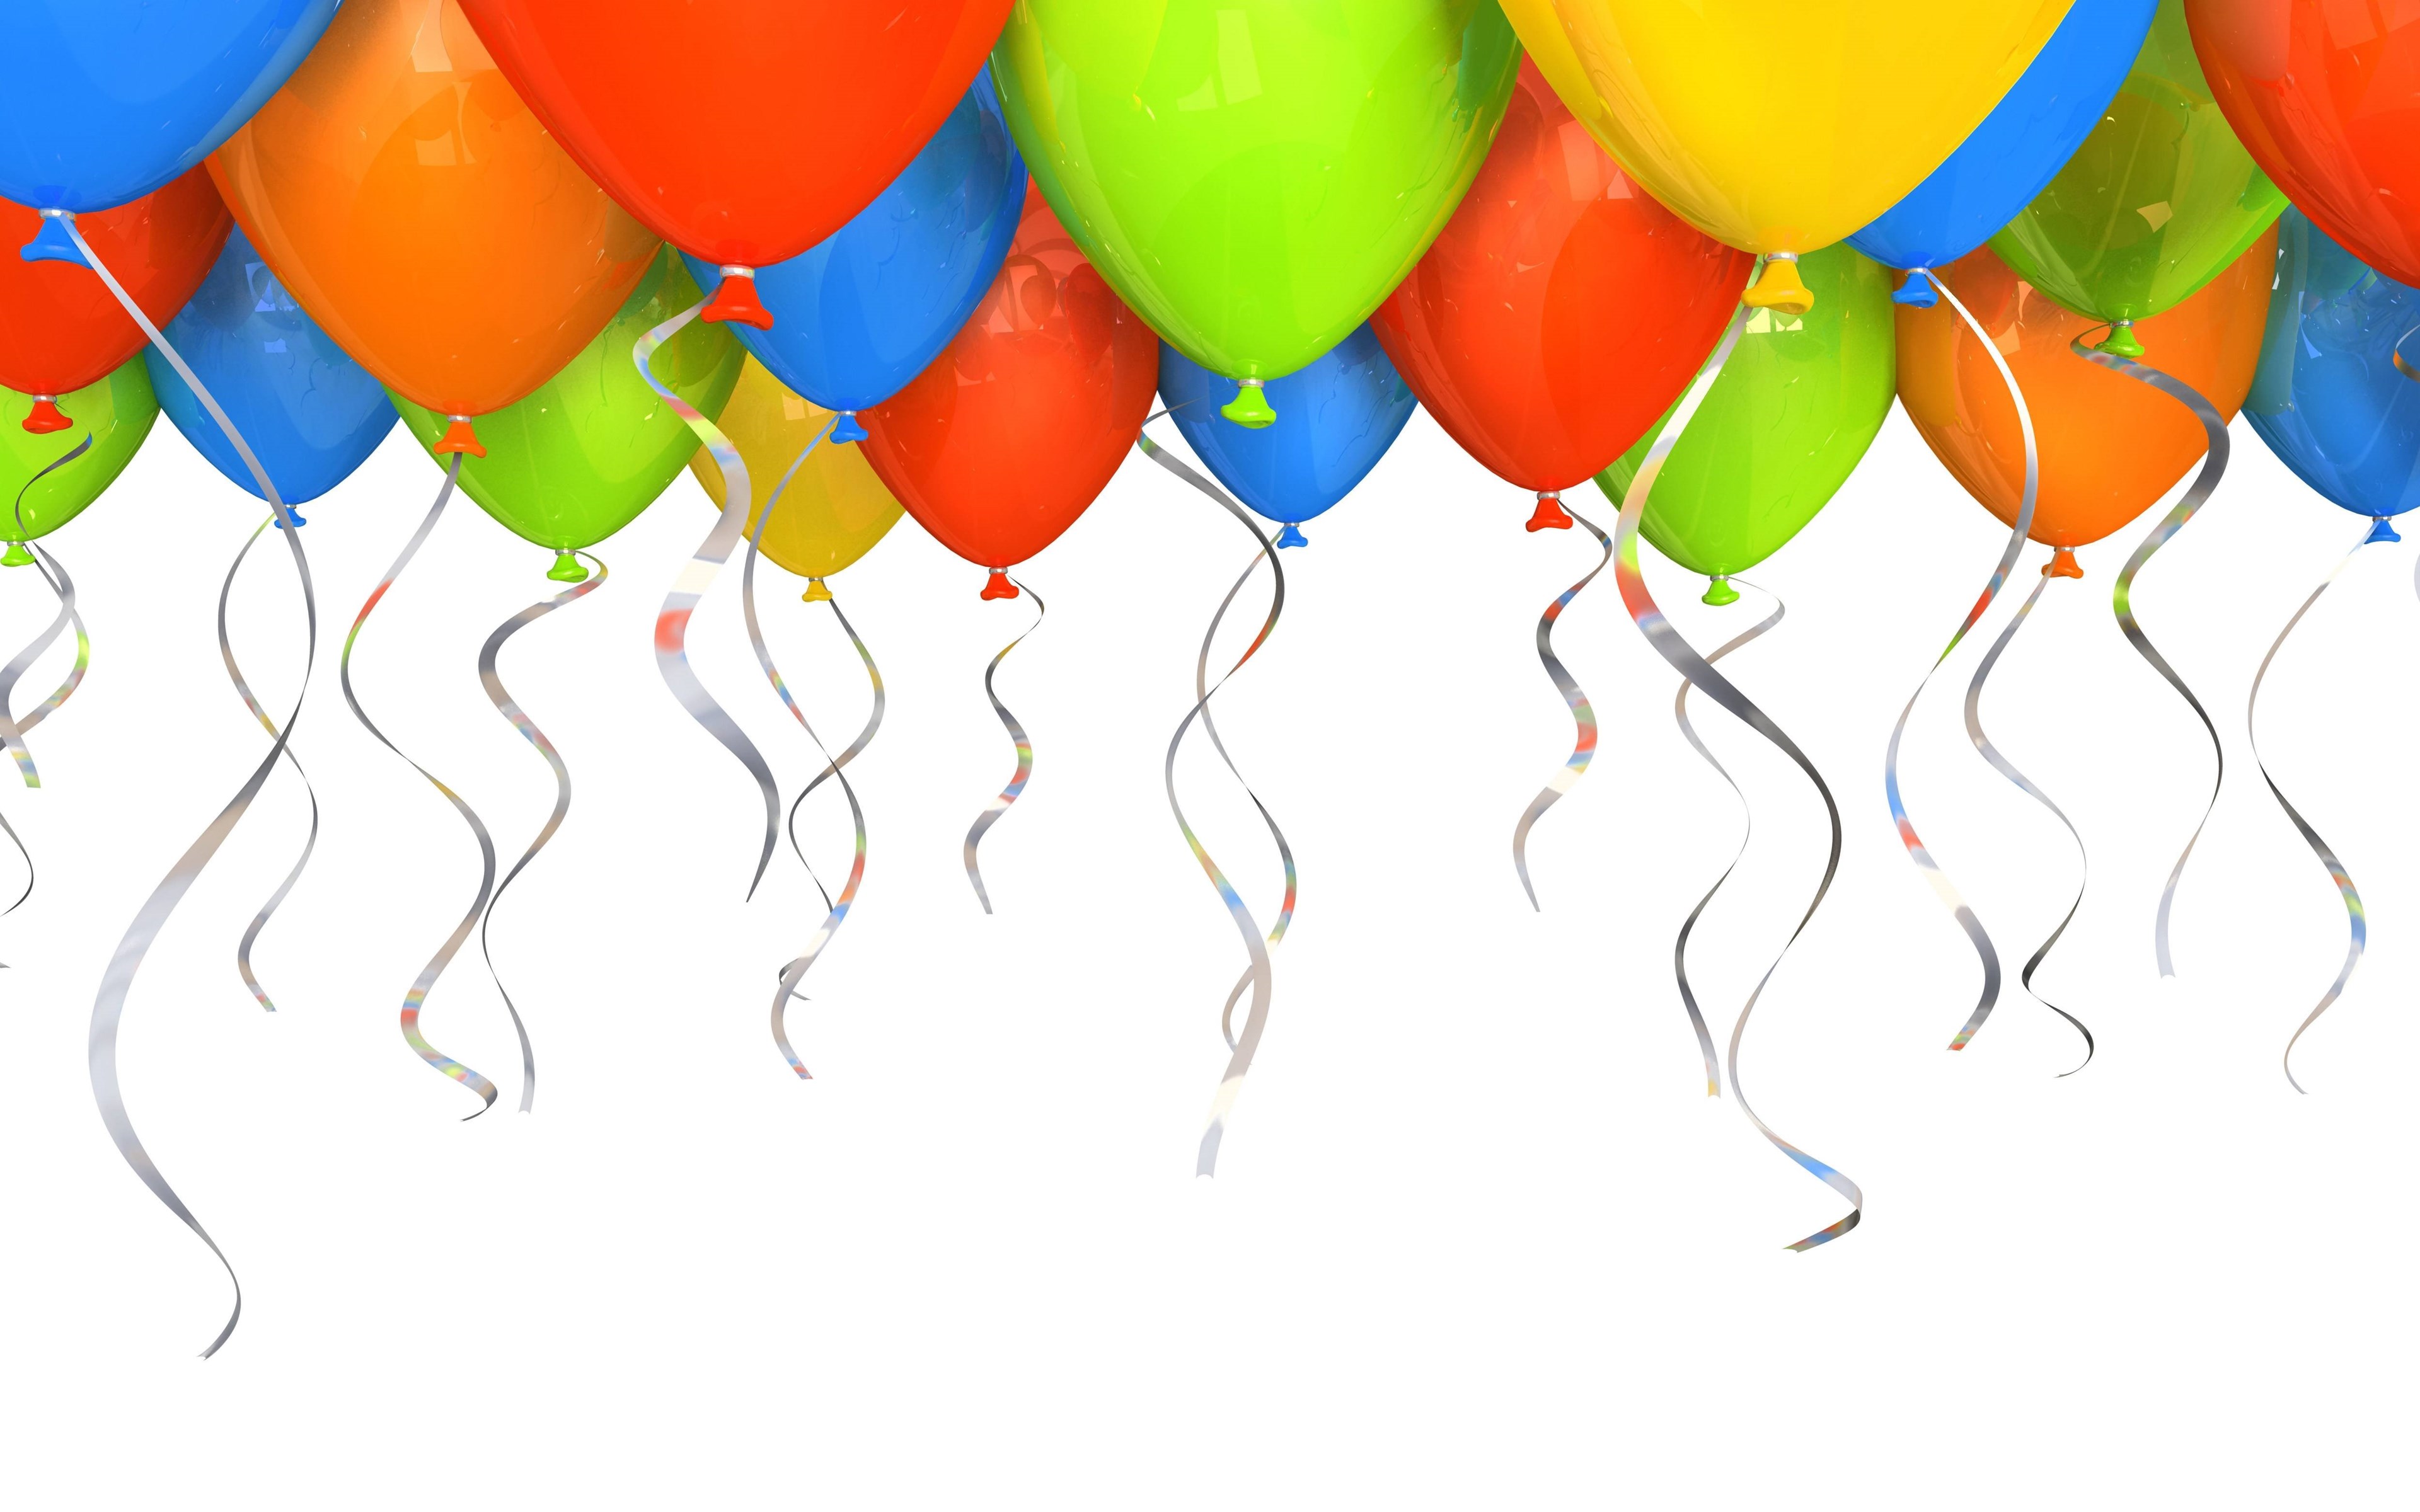 Balloons Helium Flying Rainbow White Hd Wallpapers Desktop Background Images, Photos, Reviews